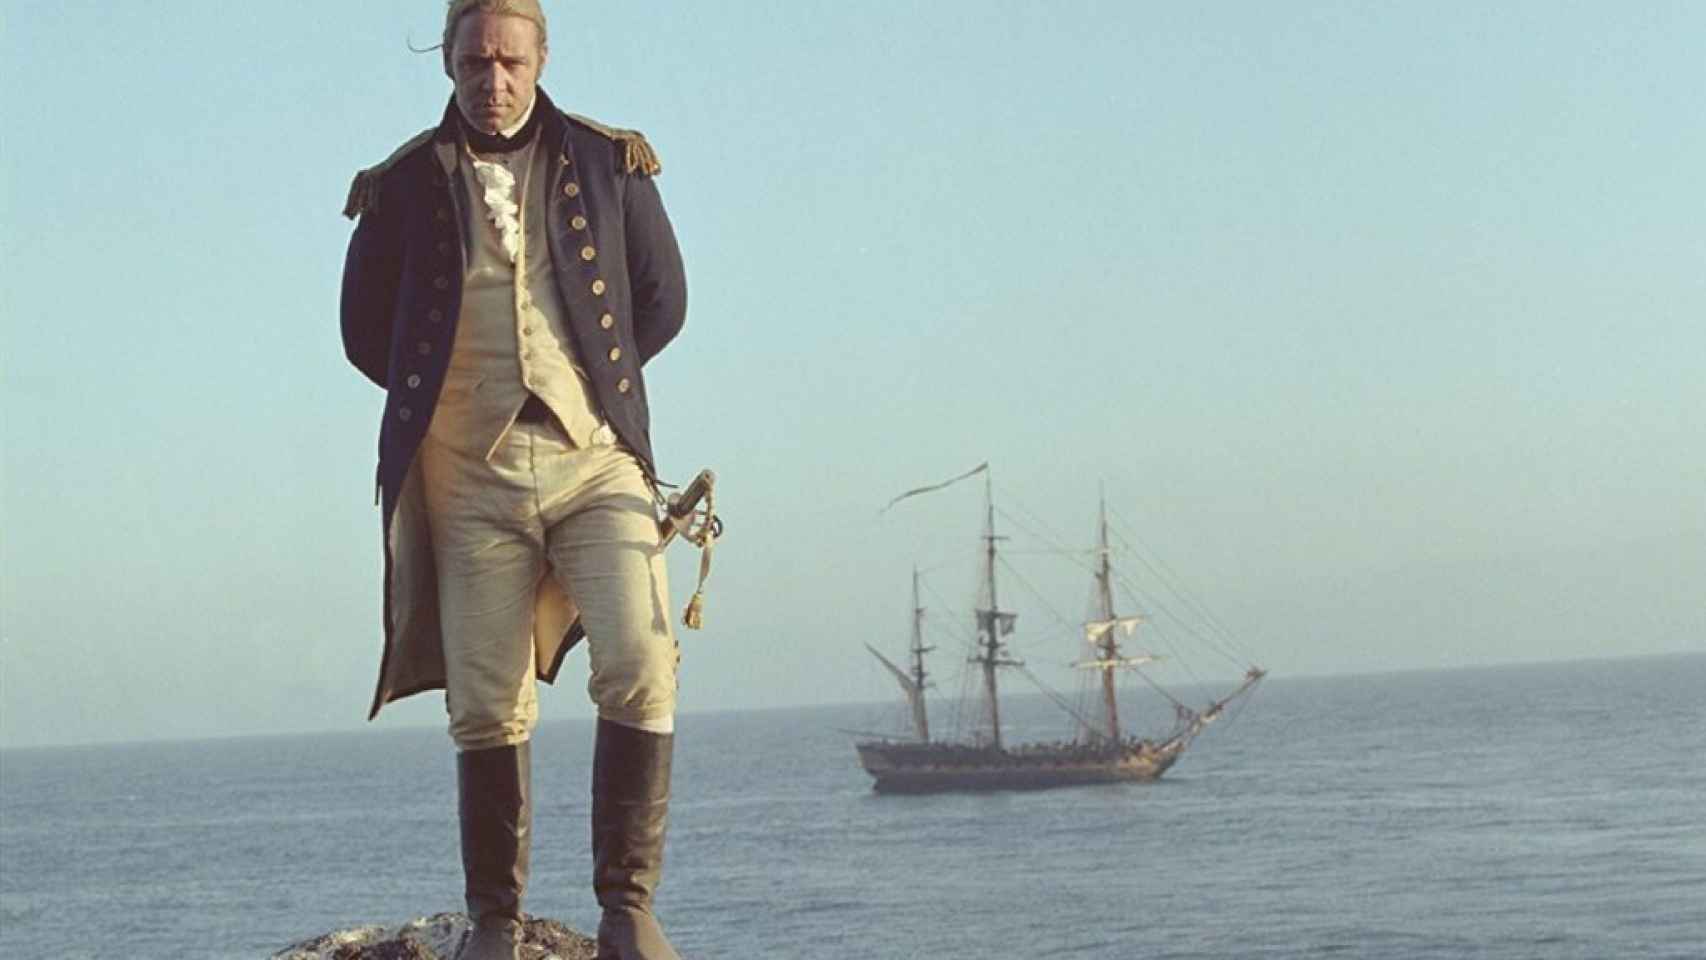 'Master and commander'.